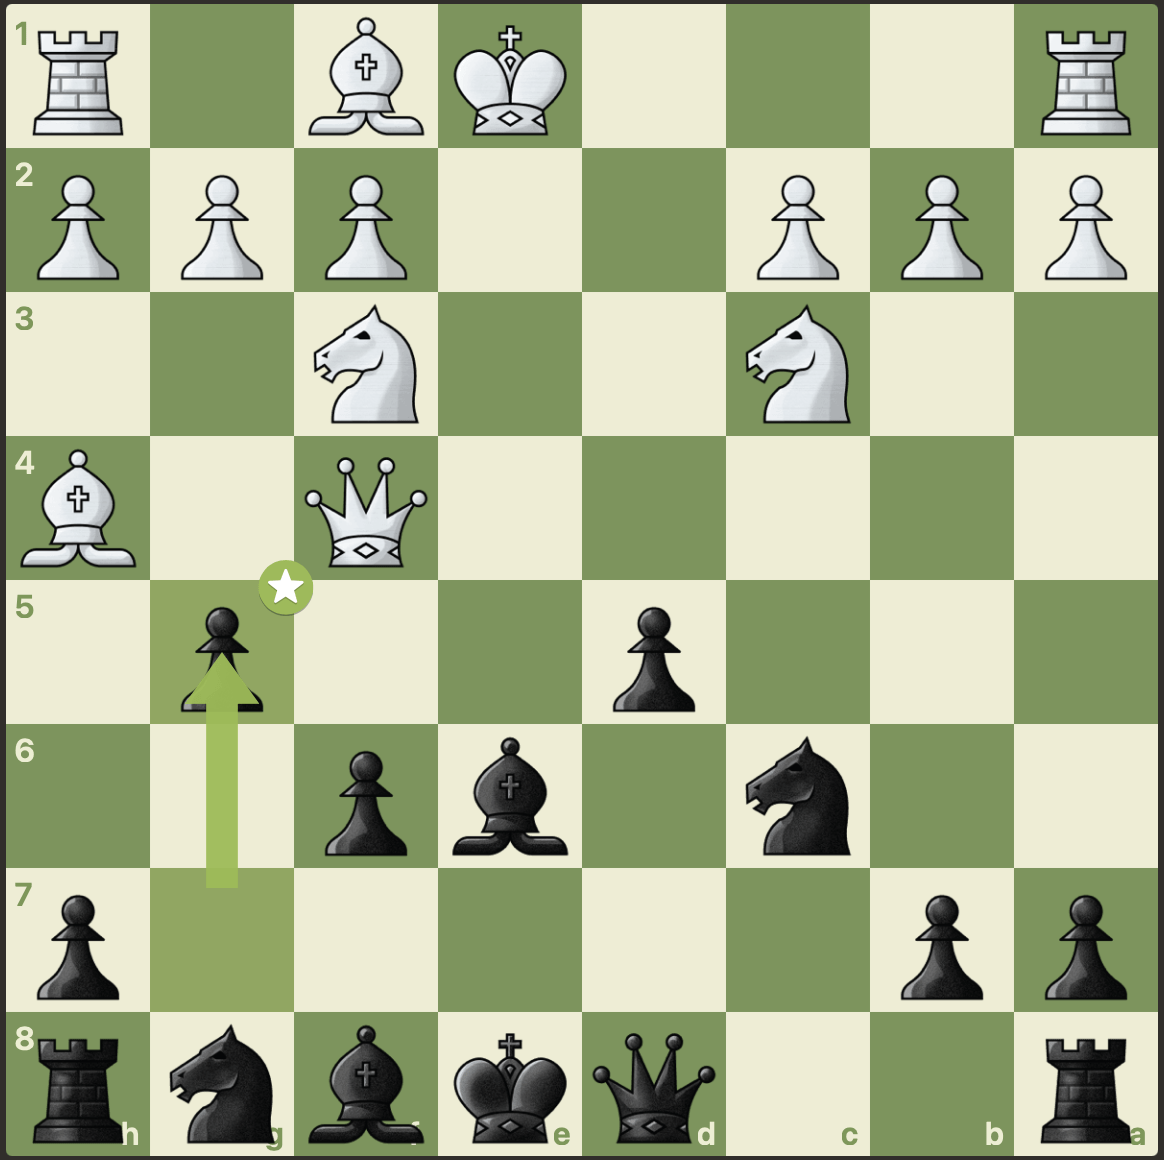 got my first brilliant move in a chess game! blundered that same